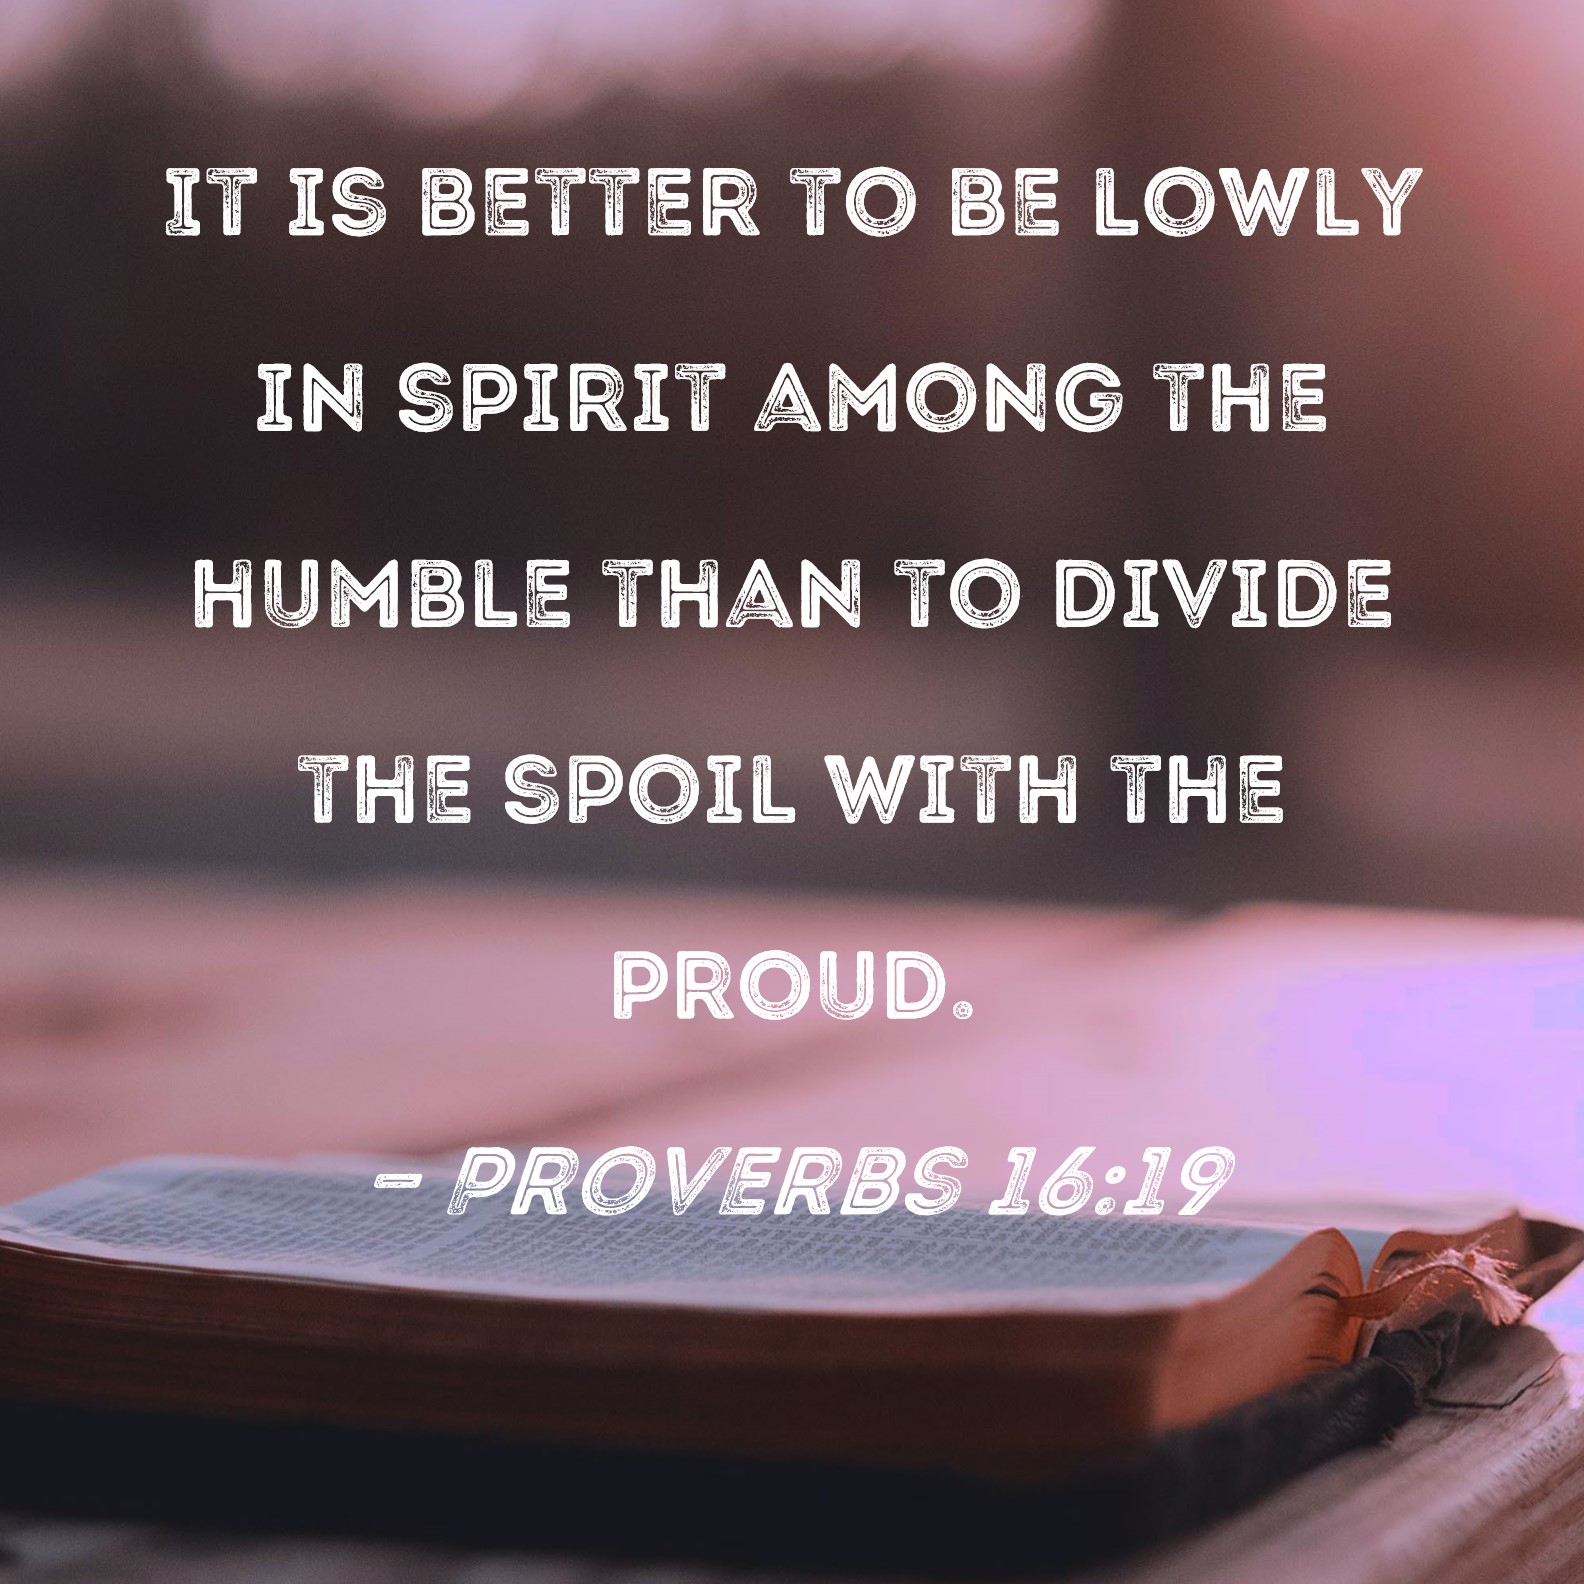 Proverbs 16:19 It is better to be lowly in spirit among the humble